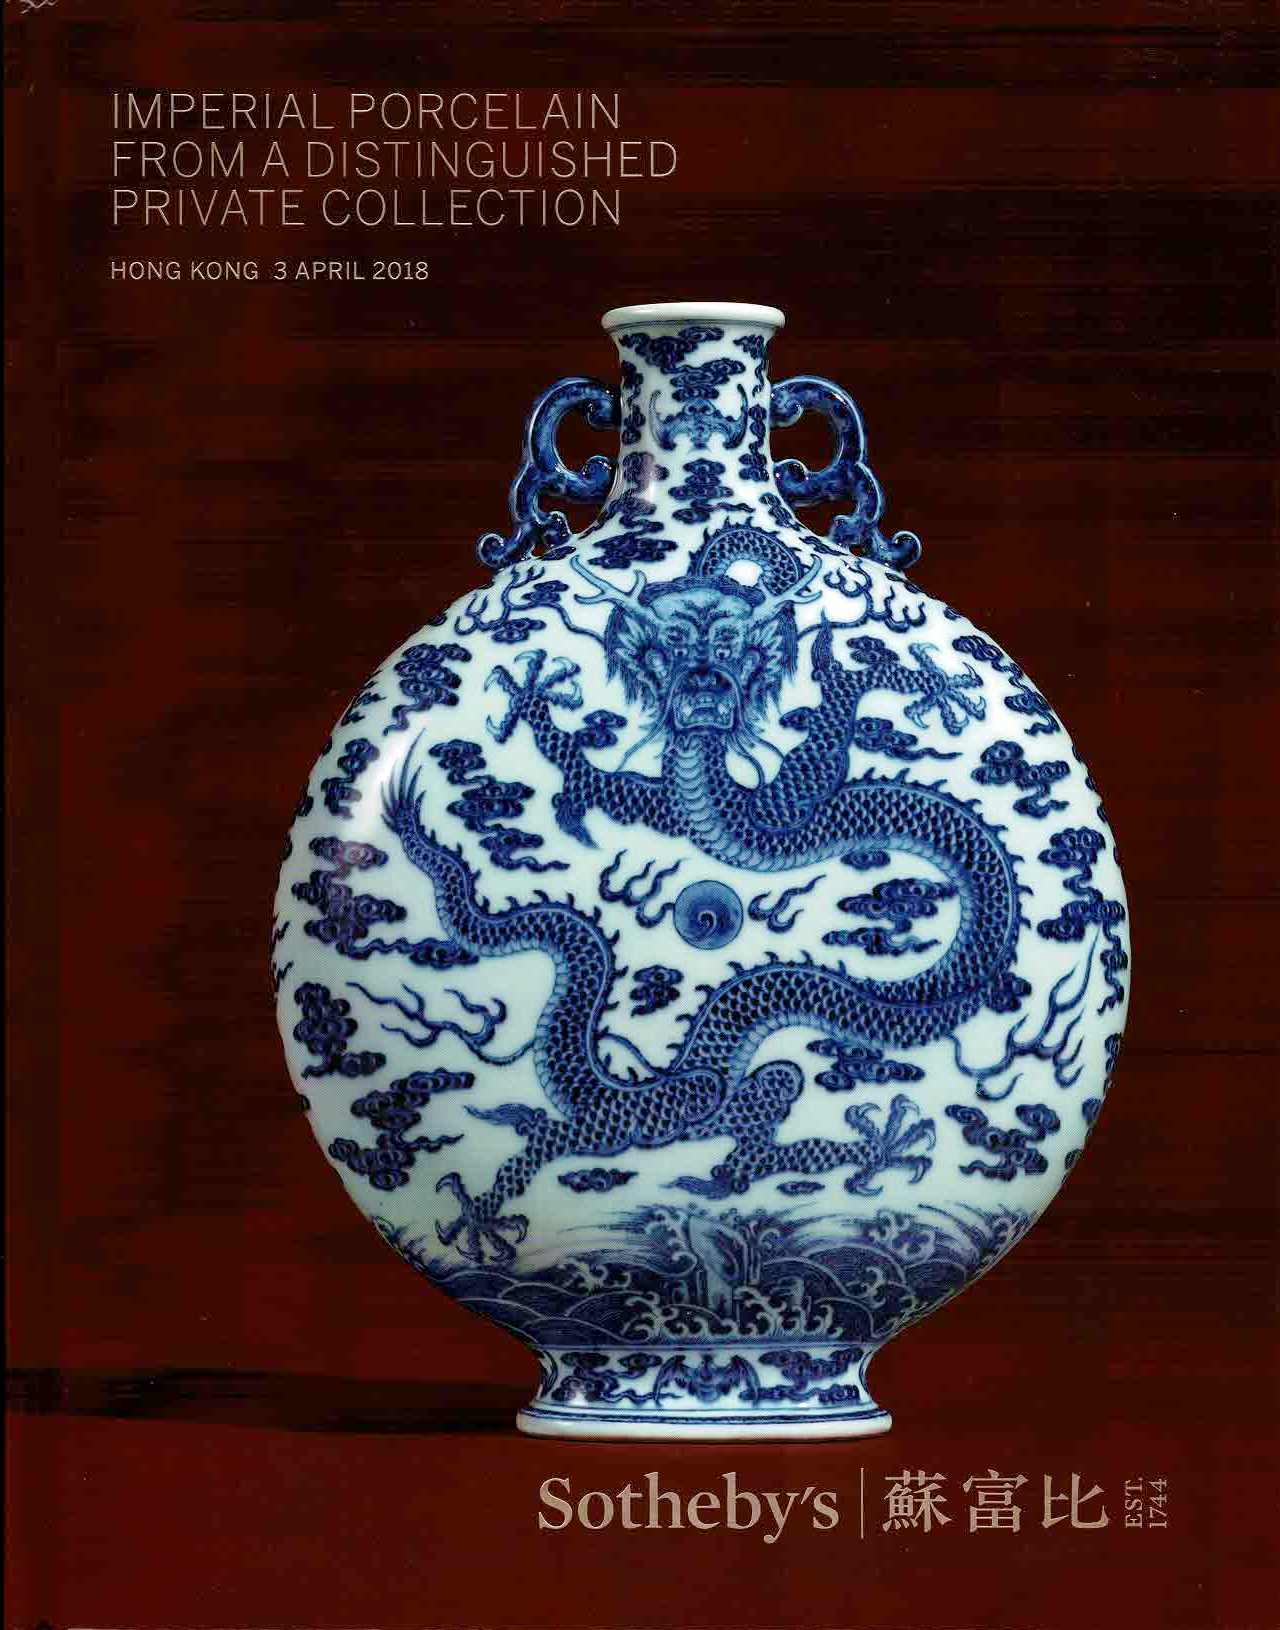 Sotheby's - Imperial Porcelain from a Distinguished Private Collection